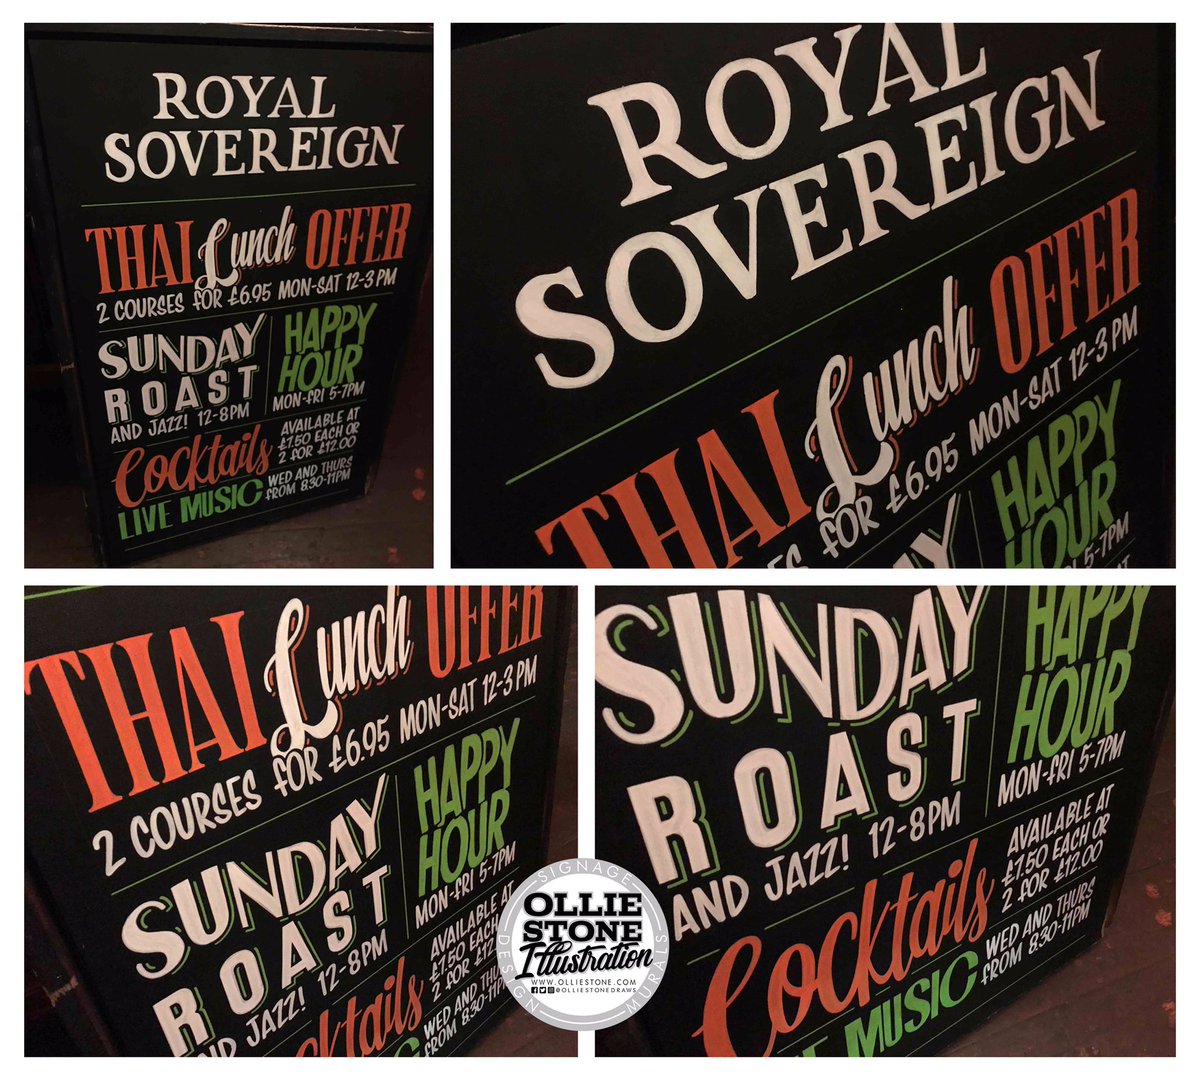 Colourful pavement chalkboard for the ladies at @TheRoyalSovPub in Brighton 😊🎨🖐
#royalsovereign #pub #chalkboards #blackboards #handpainted #signs #signage #signwriting #pubsigns #pubchalkboards #chalkartist #brighton #olliestonedraws